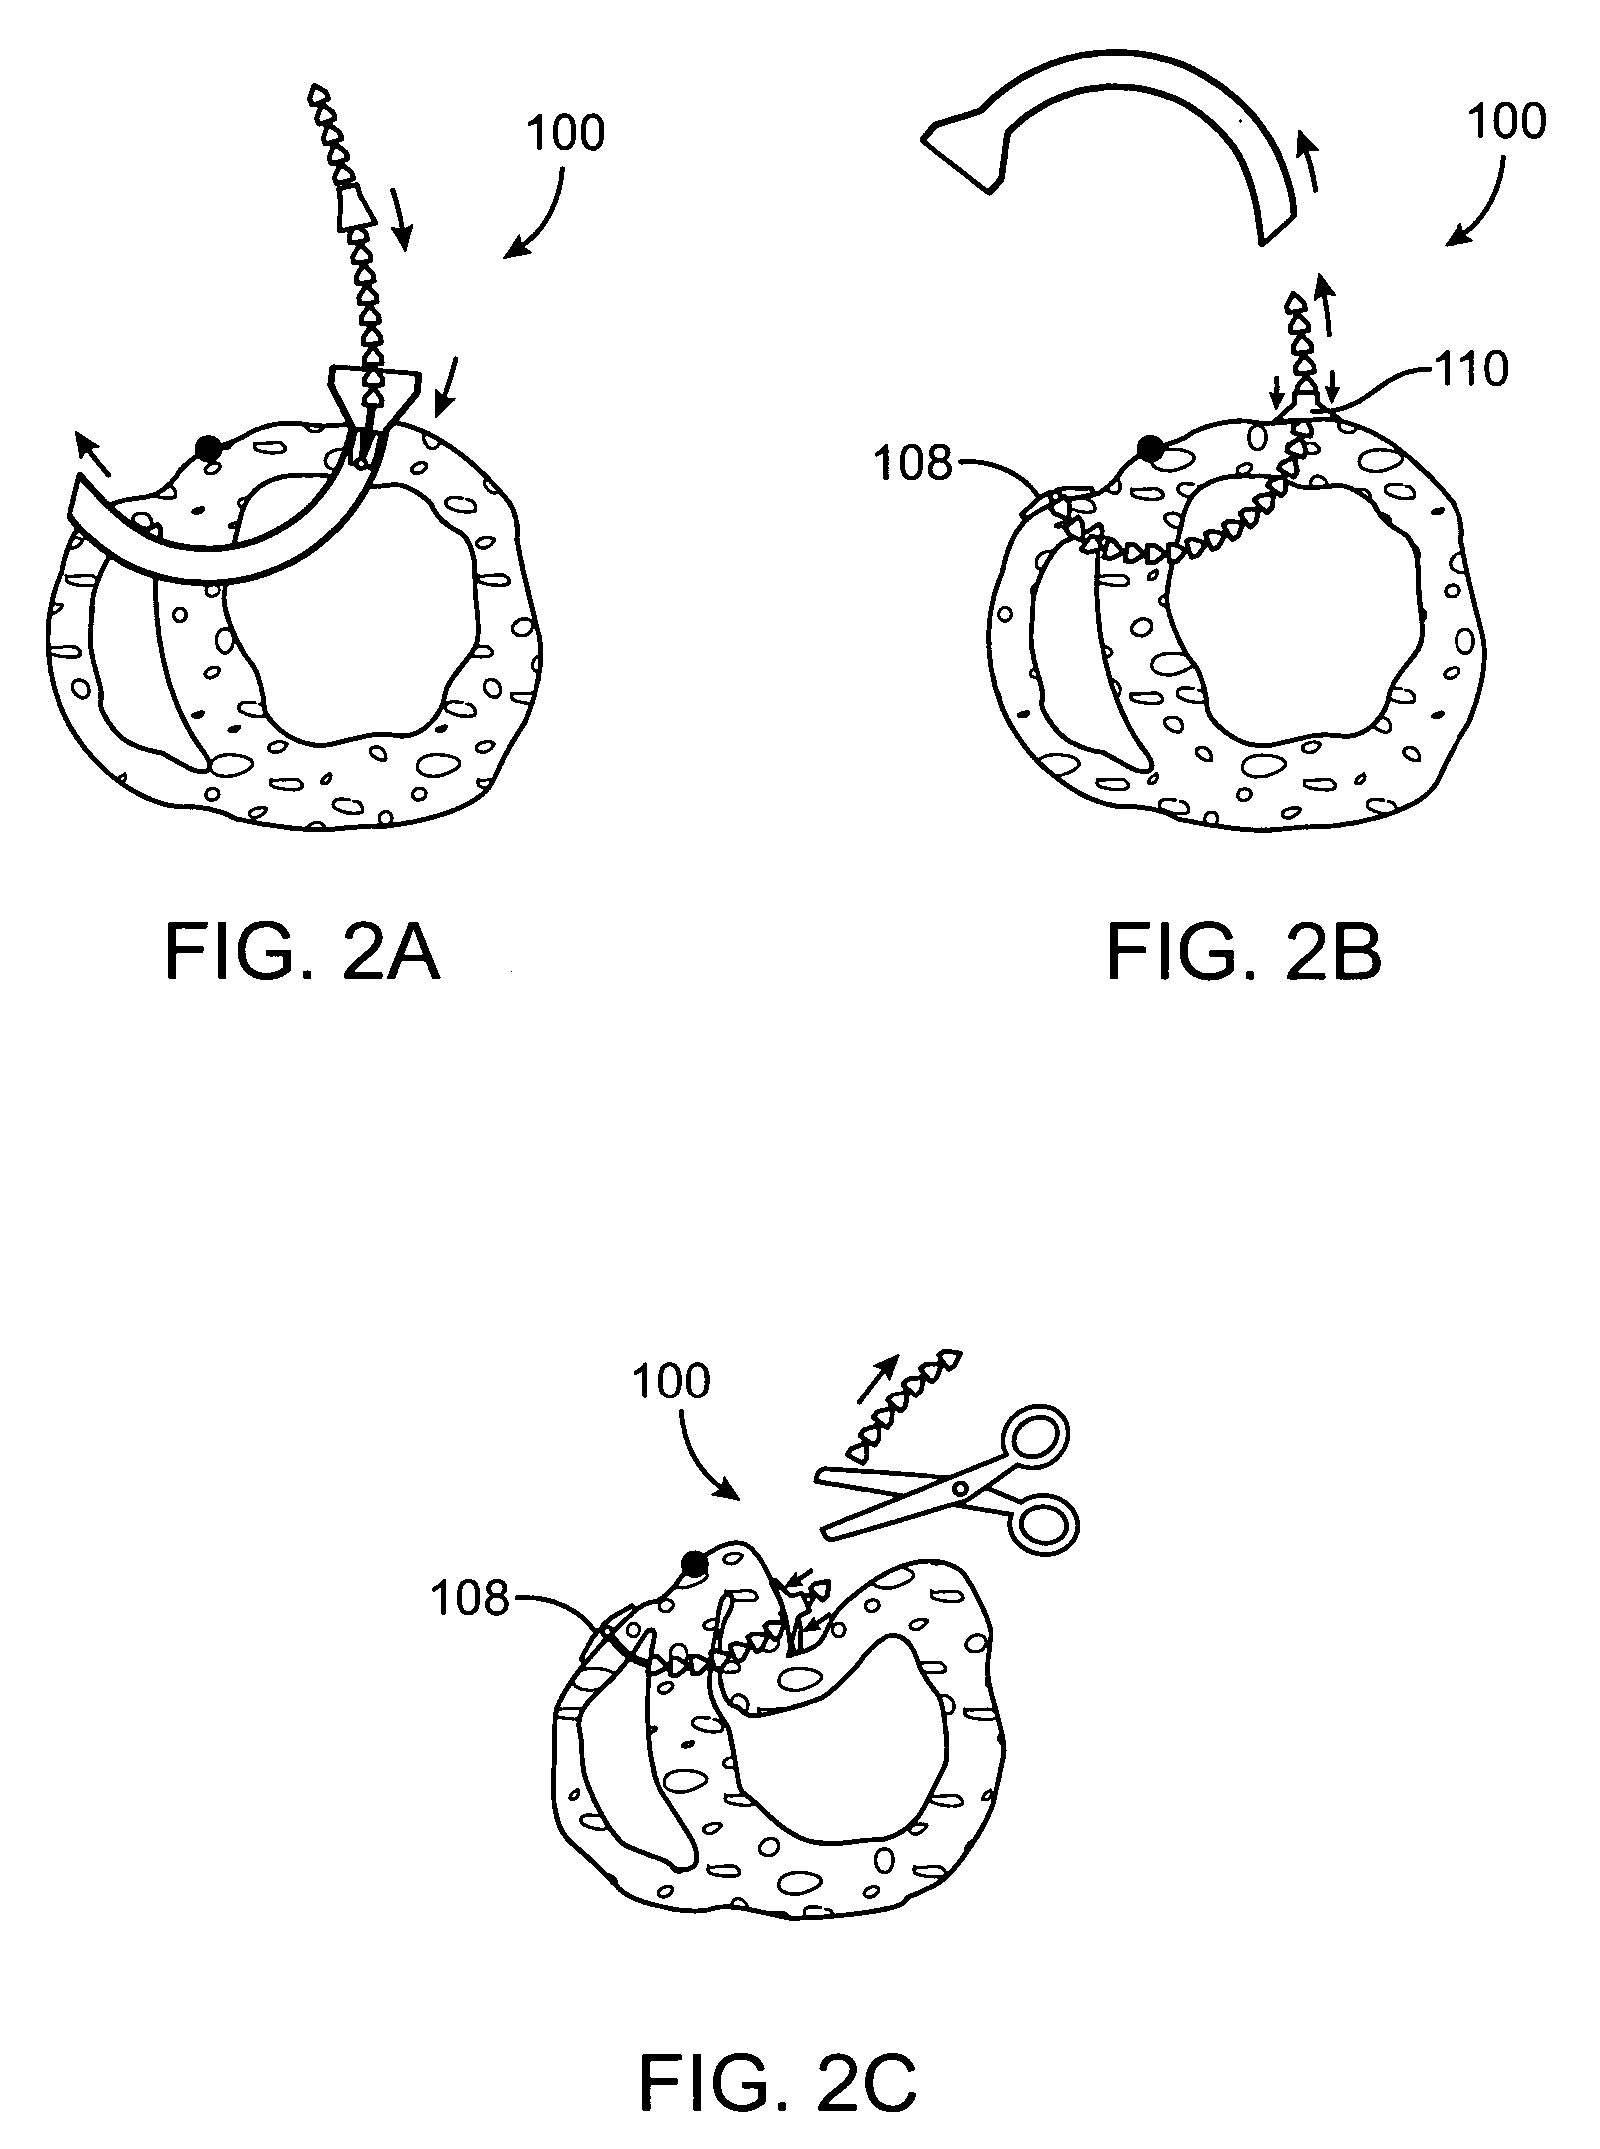 Method and apparatus for closing off a portion of a heart ventricle